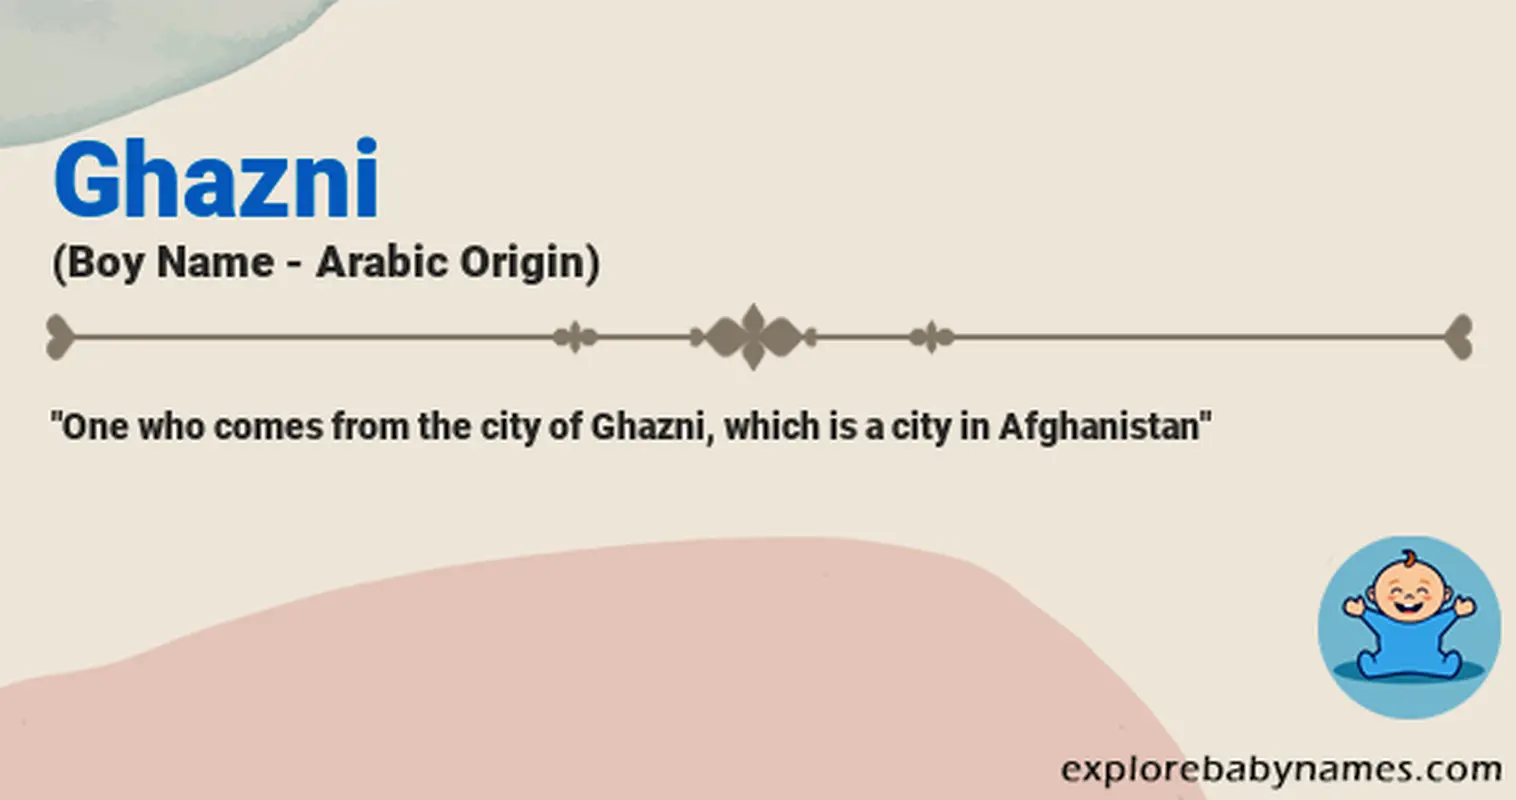 Meaning of Ghazni